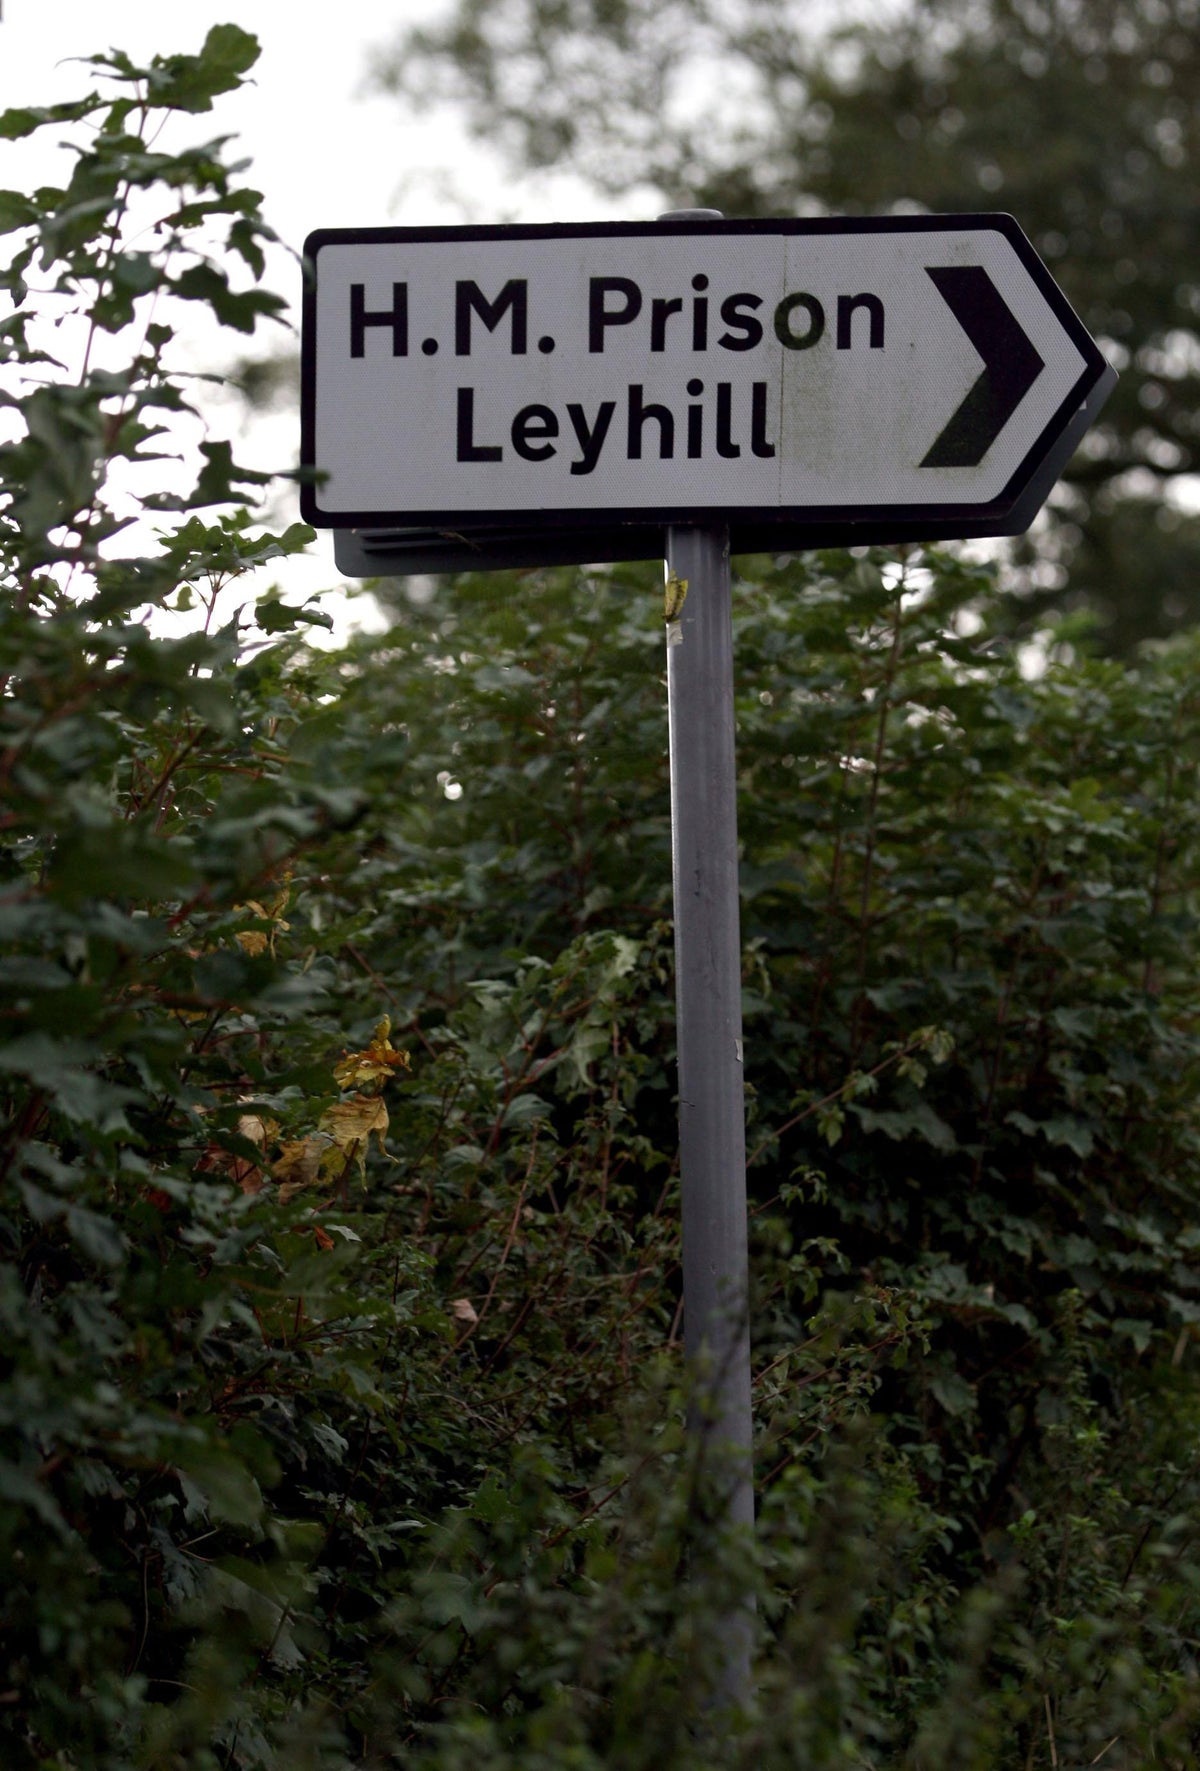 Two inmates on the run after escaping Leyhill Prison in Gloucestershire